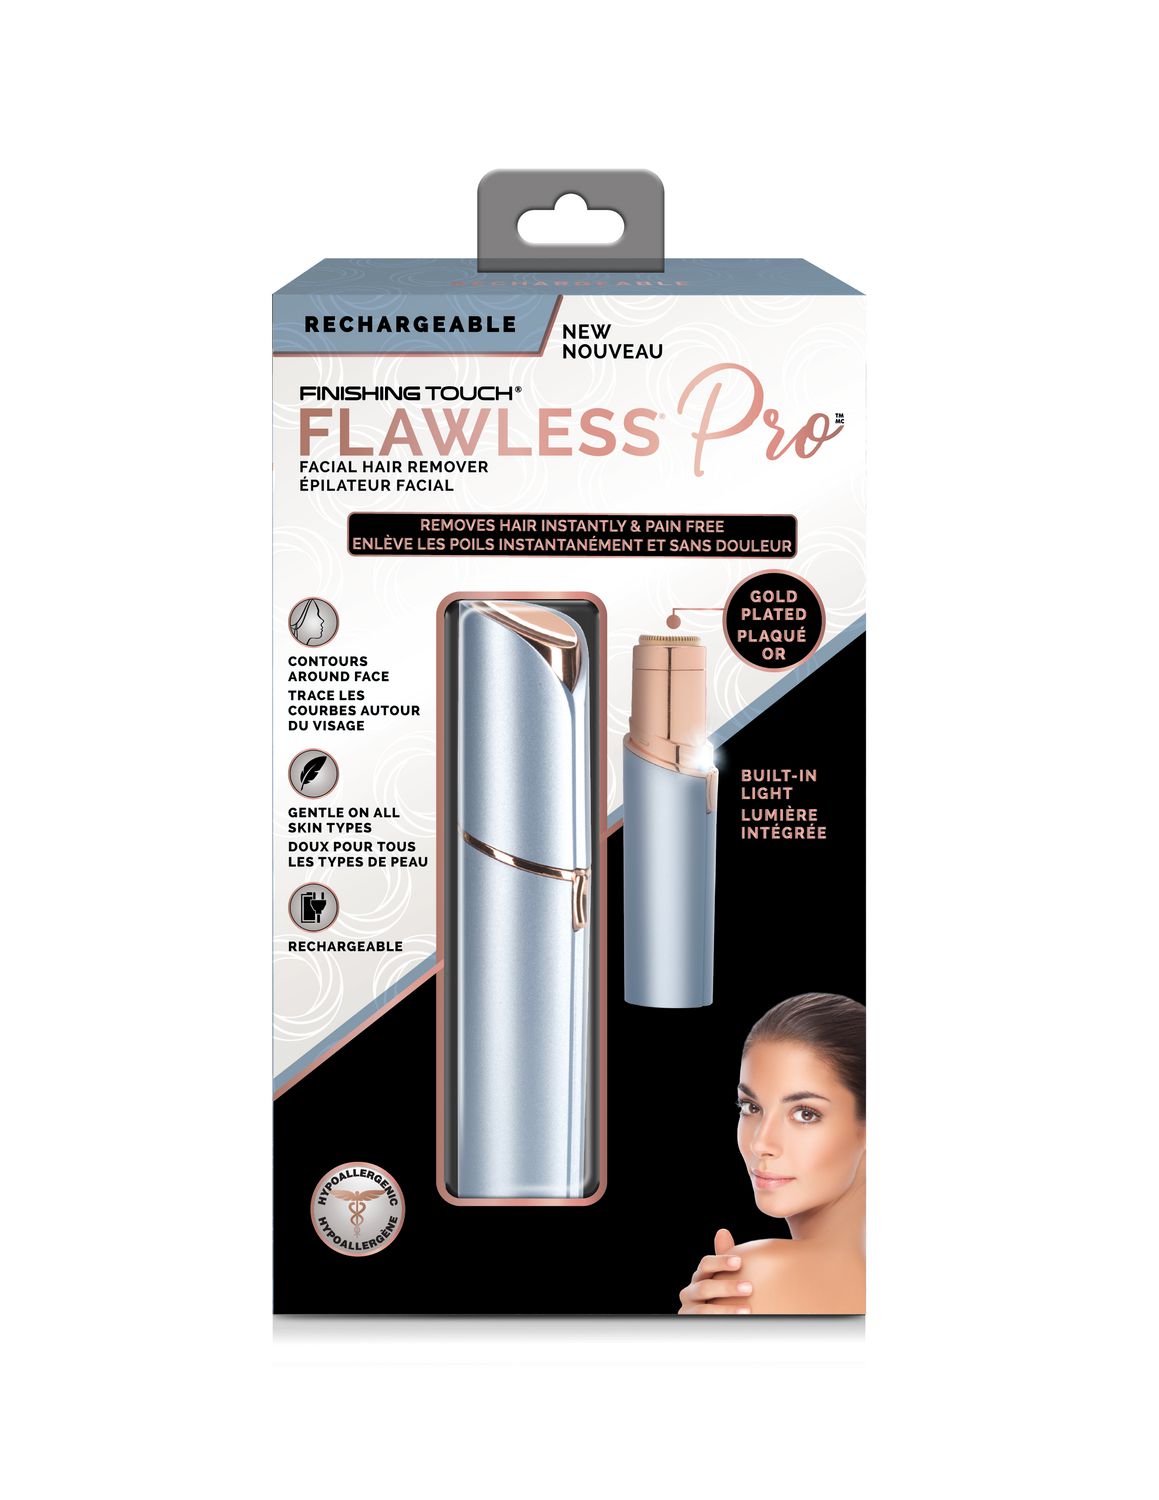 Finishing Touch Flawless Facial Hair Remover Pro, Rechargeable | Walmart  Canada